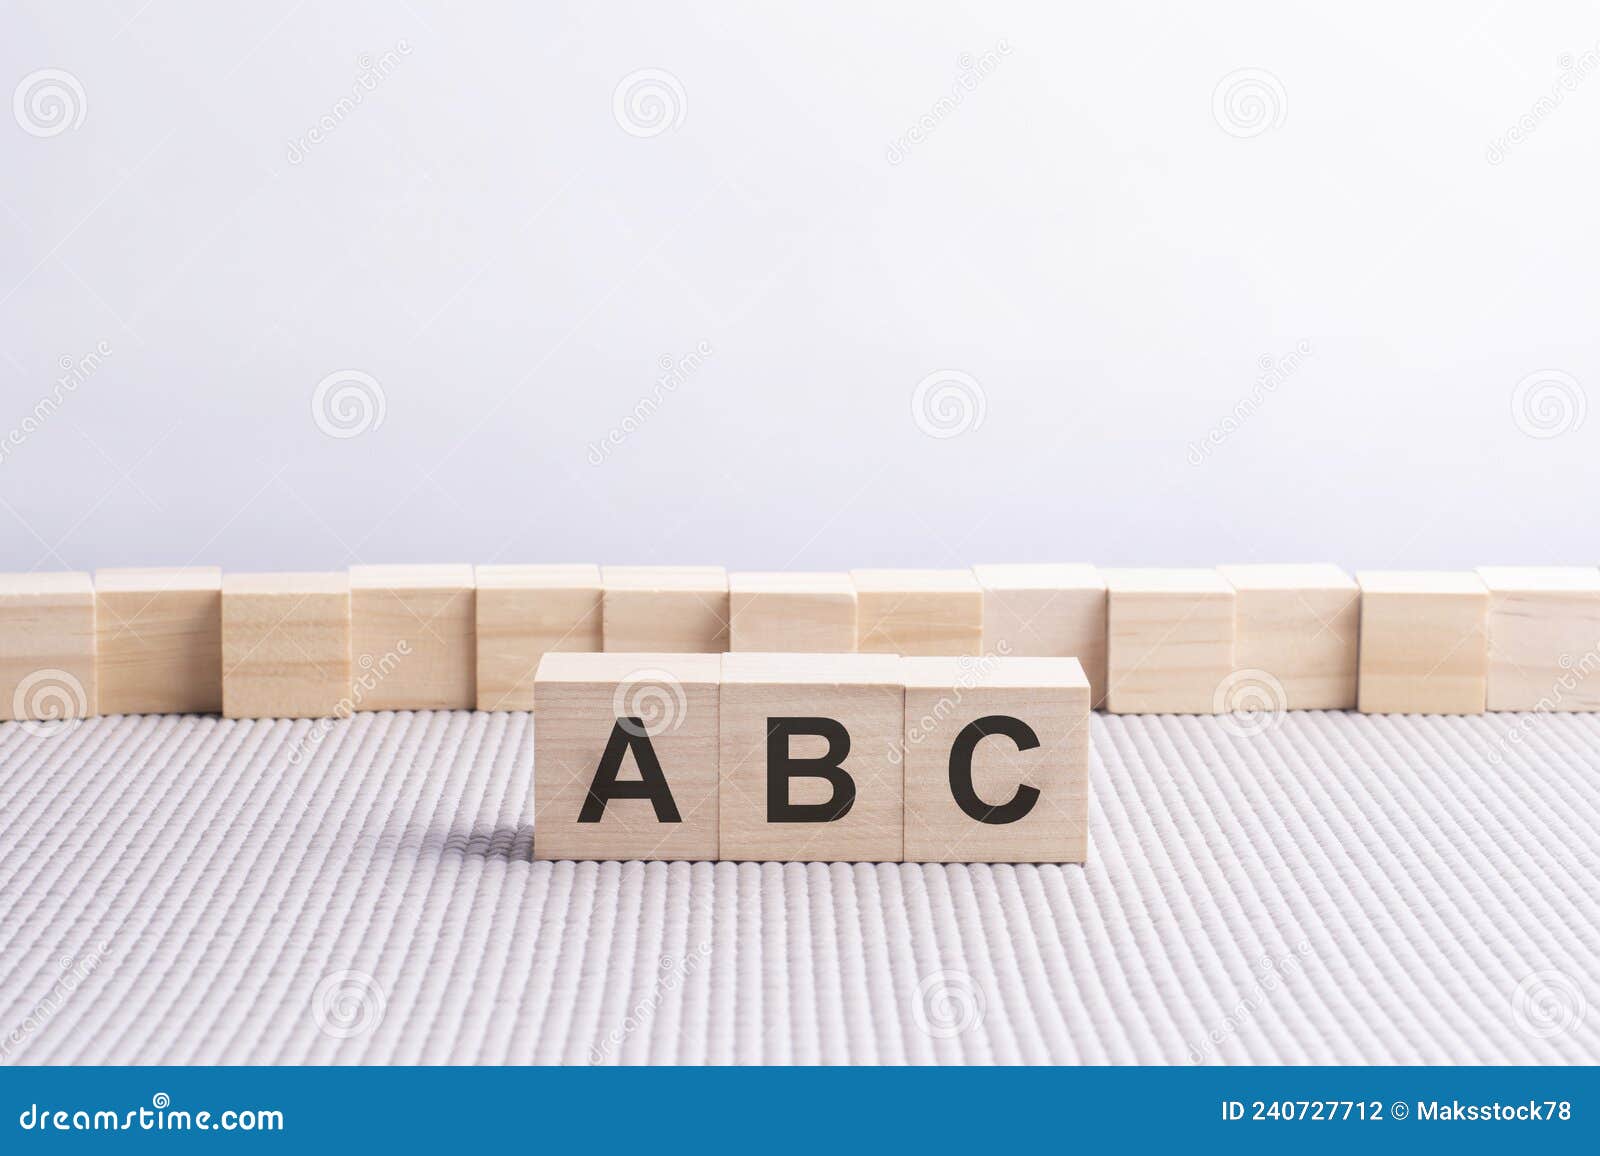 wooden cube with the letter from the abc word. wooden cubes standing